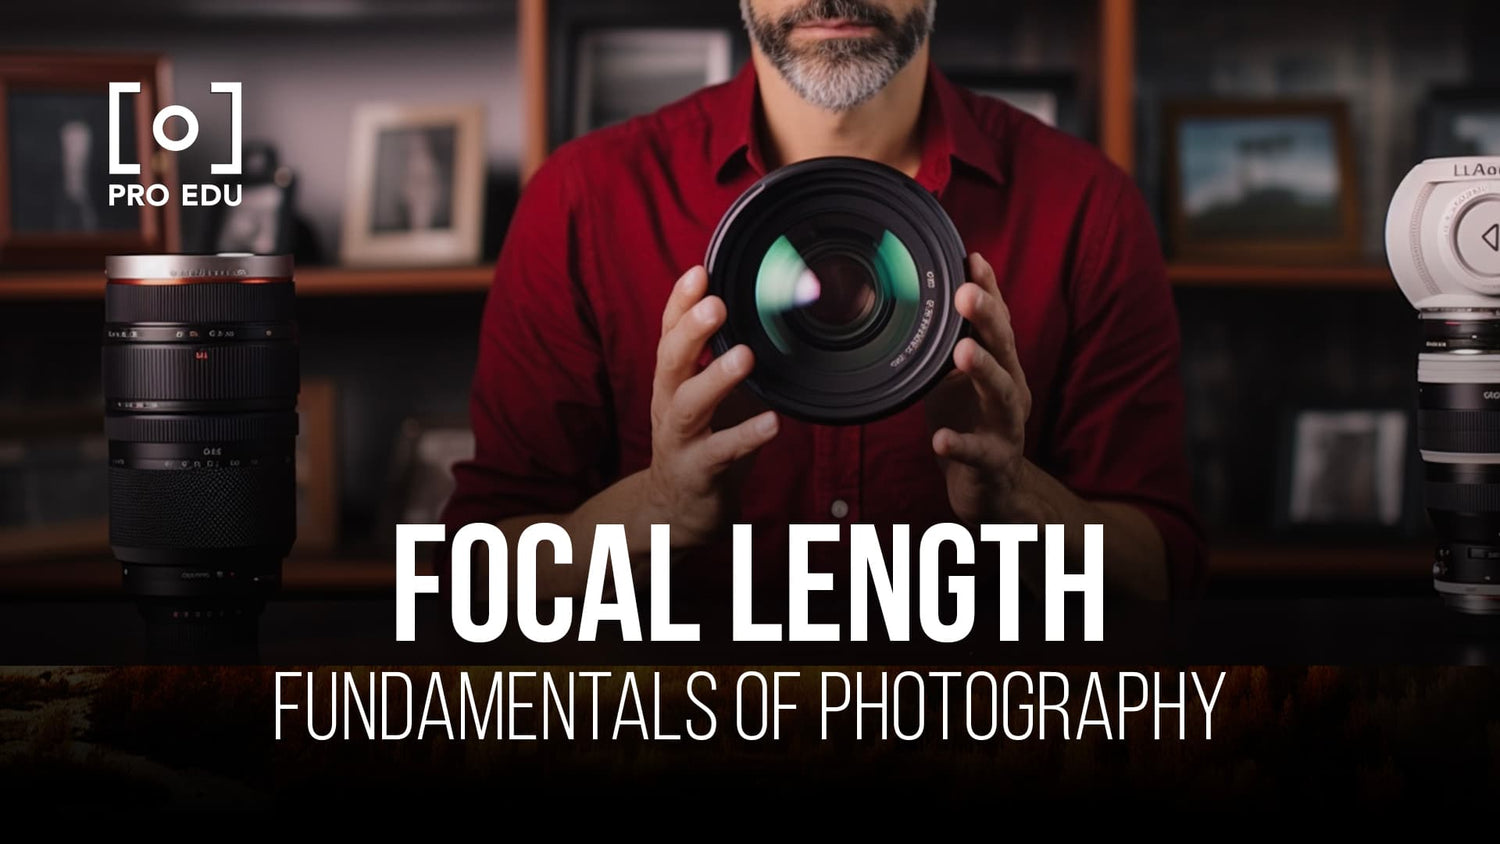 A beginner's guide to understanding focal length in photography for improved framing